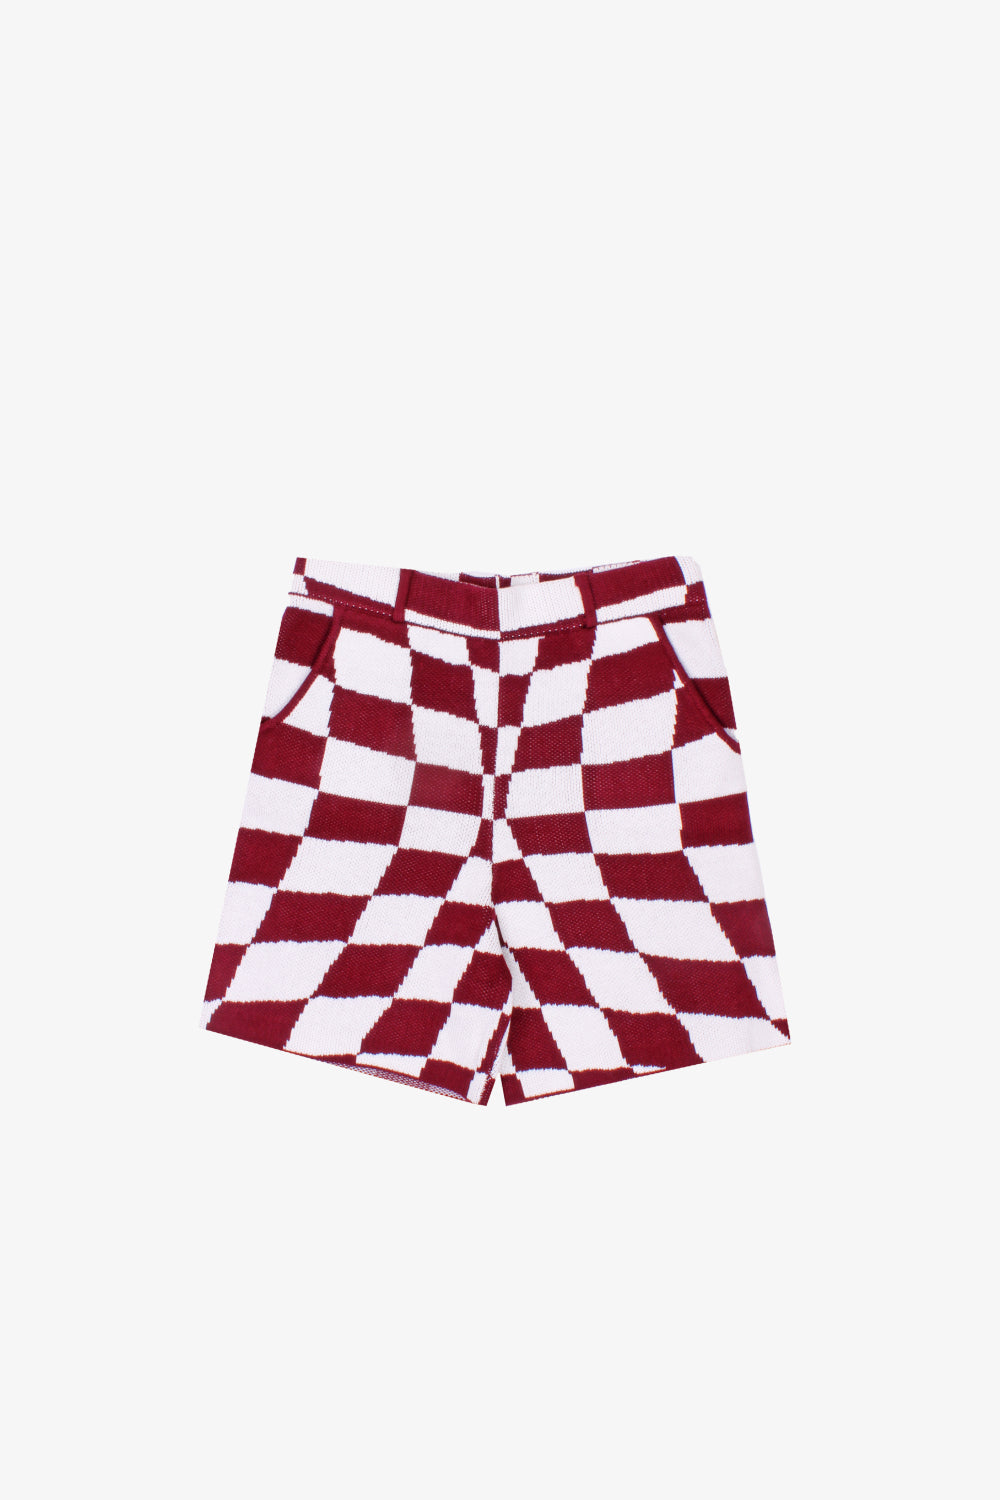 Distorted Checkered Shorts